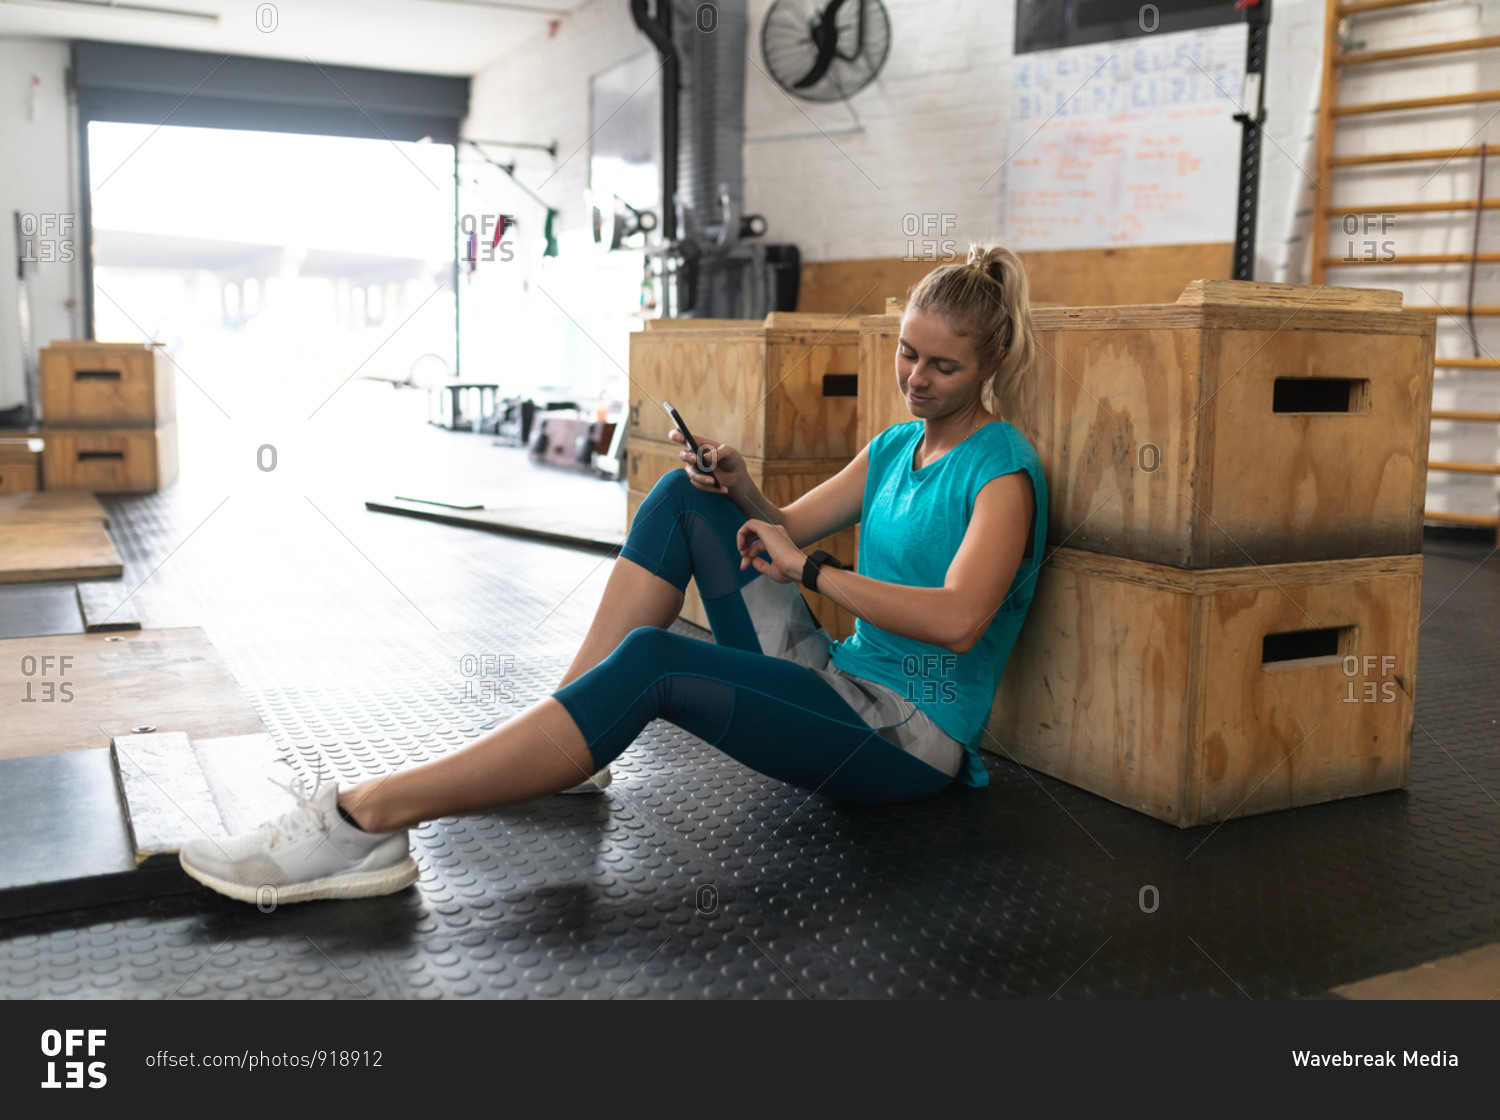 Side view of an athletic Caucasian woman wearing sports clothes cross training at a gym, taking a break from training sitting and leaning on a box, using a smartphone and smiling